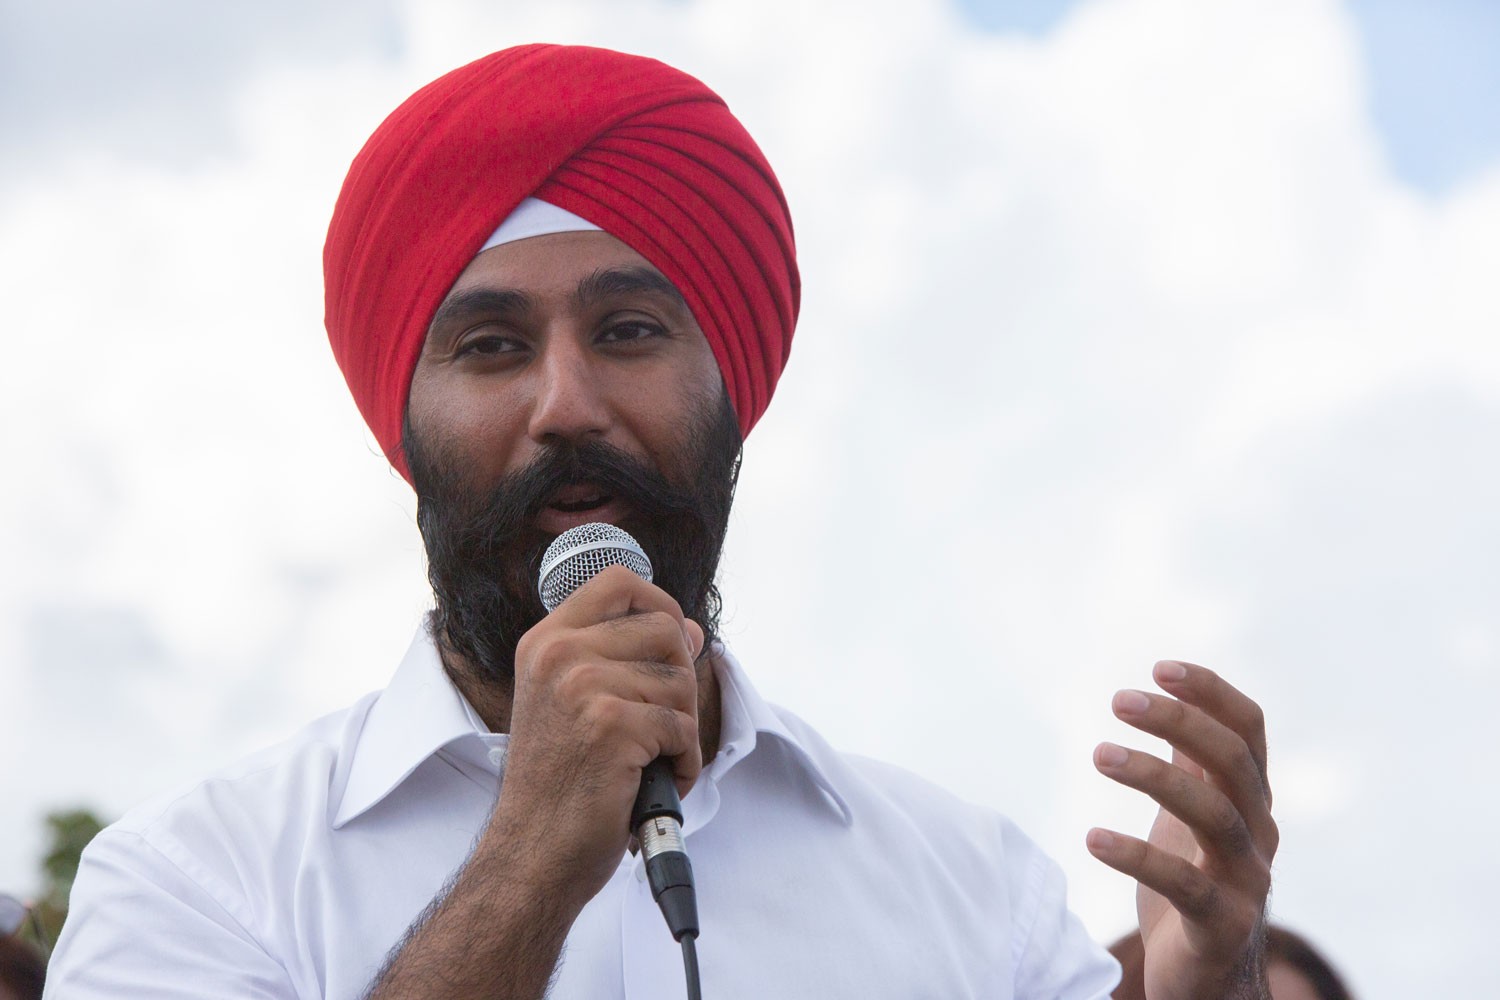 RCMP charge former Brampton MP Raj Grewal with fraud, breach of trust after three-year investigation 